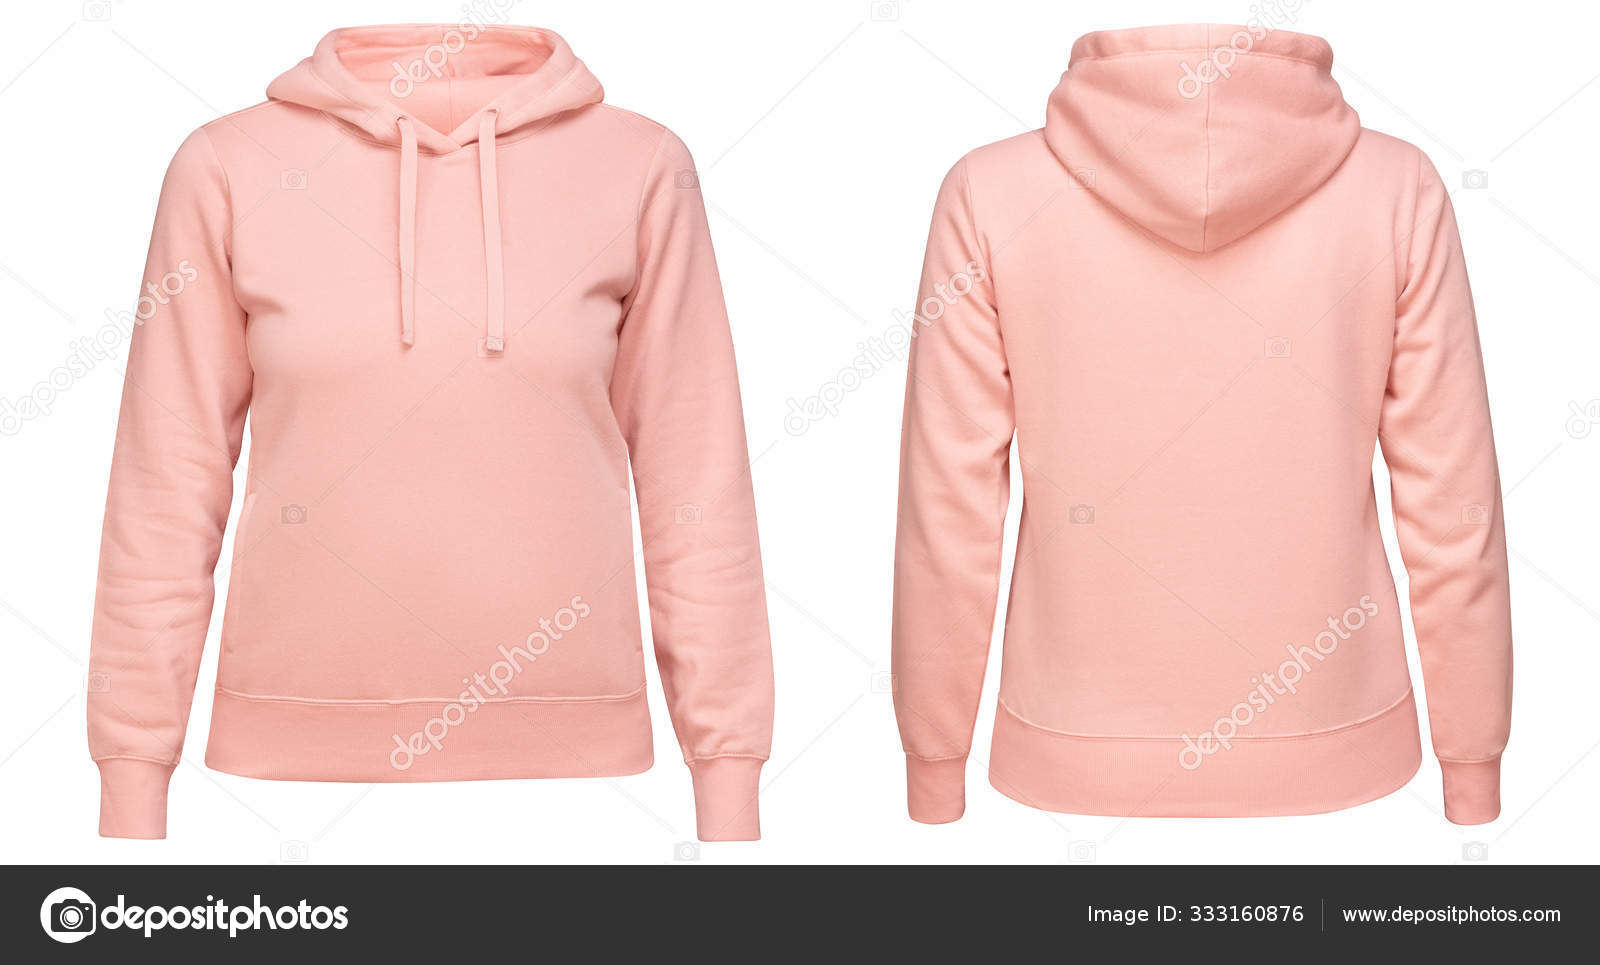 Download Pink Female Hoodie Sweatshirt With Long Sleeve Women Hoody With Hood For Your Design Mockup For Print Isolated On White Background Template Sport Pullover Front And Back View Stock Photo Image